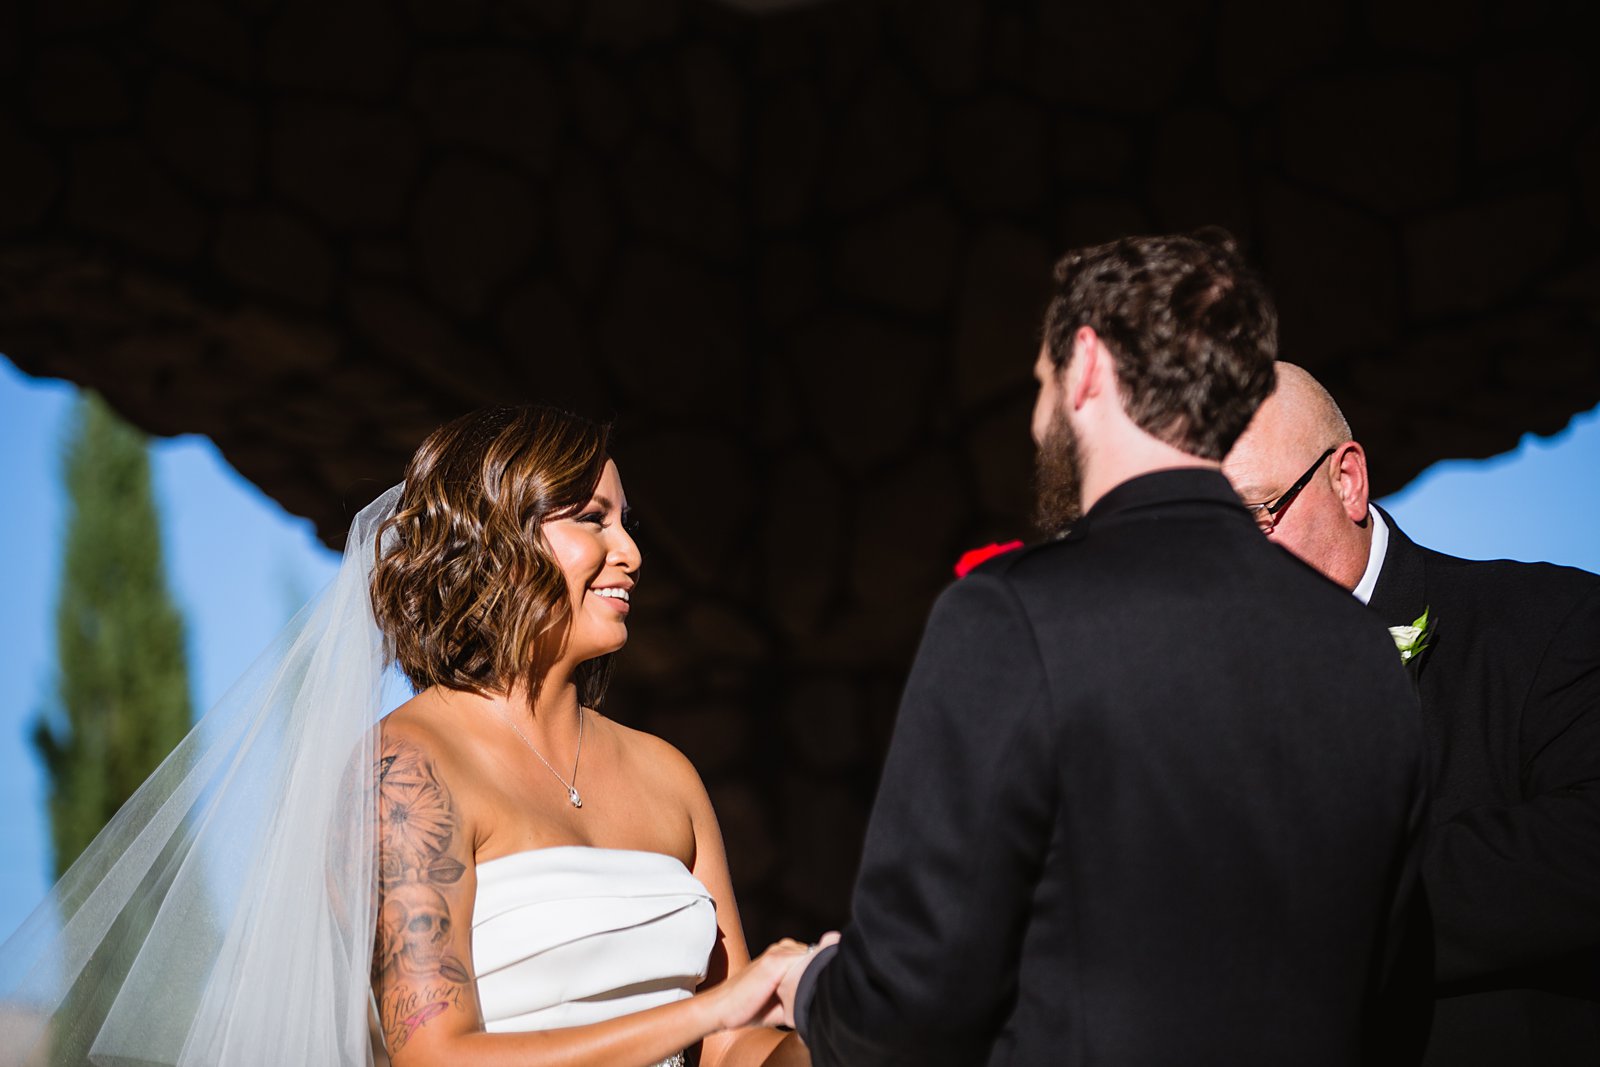 Bride smiling during the wedding ceremony by Mesa wedding photographers PMA Photography.